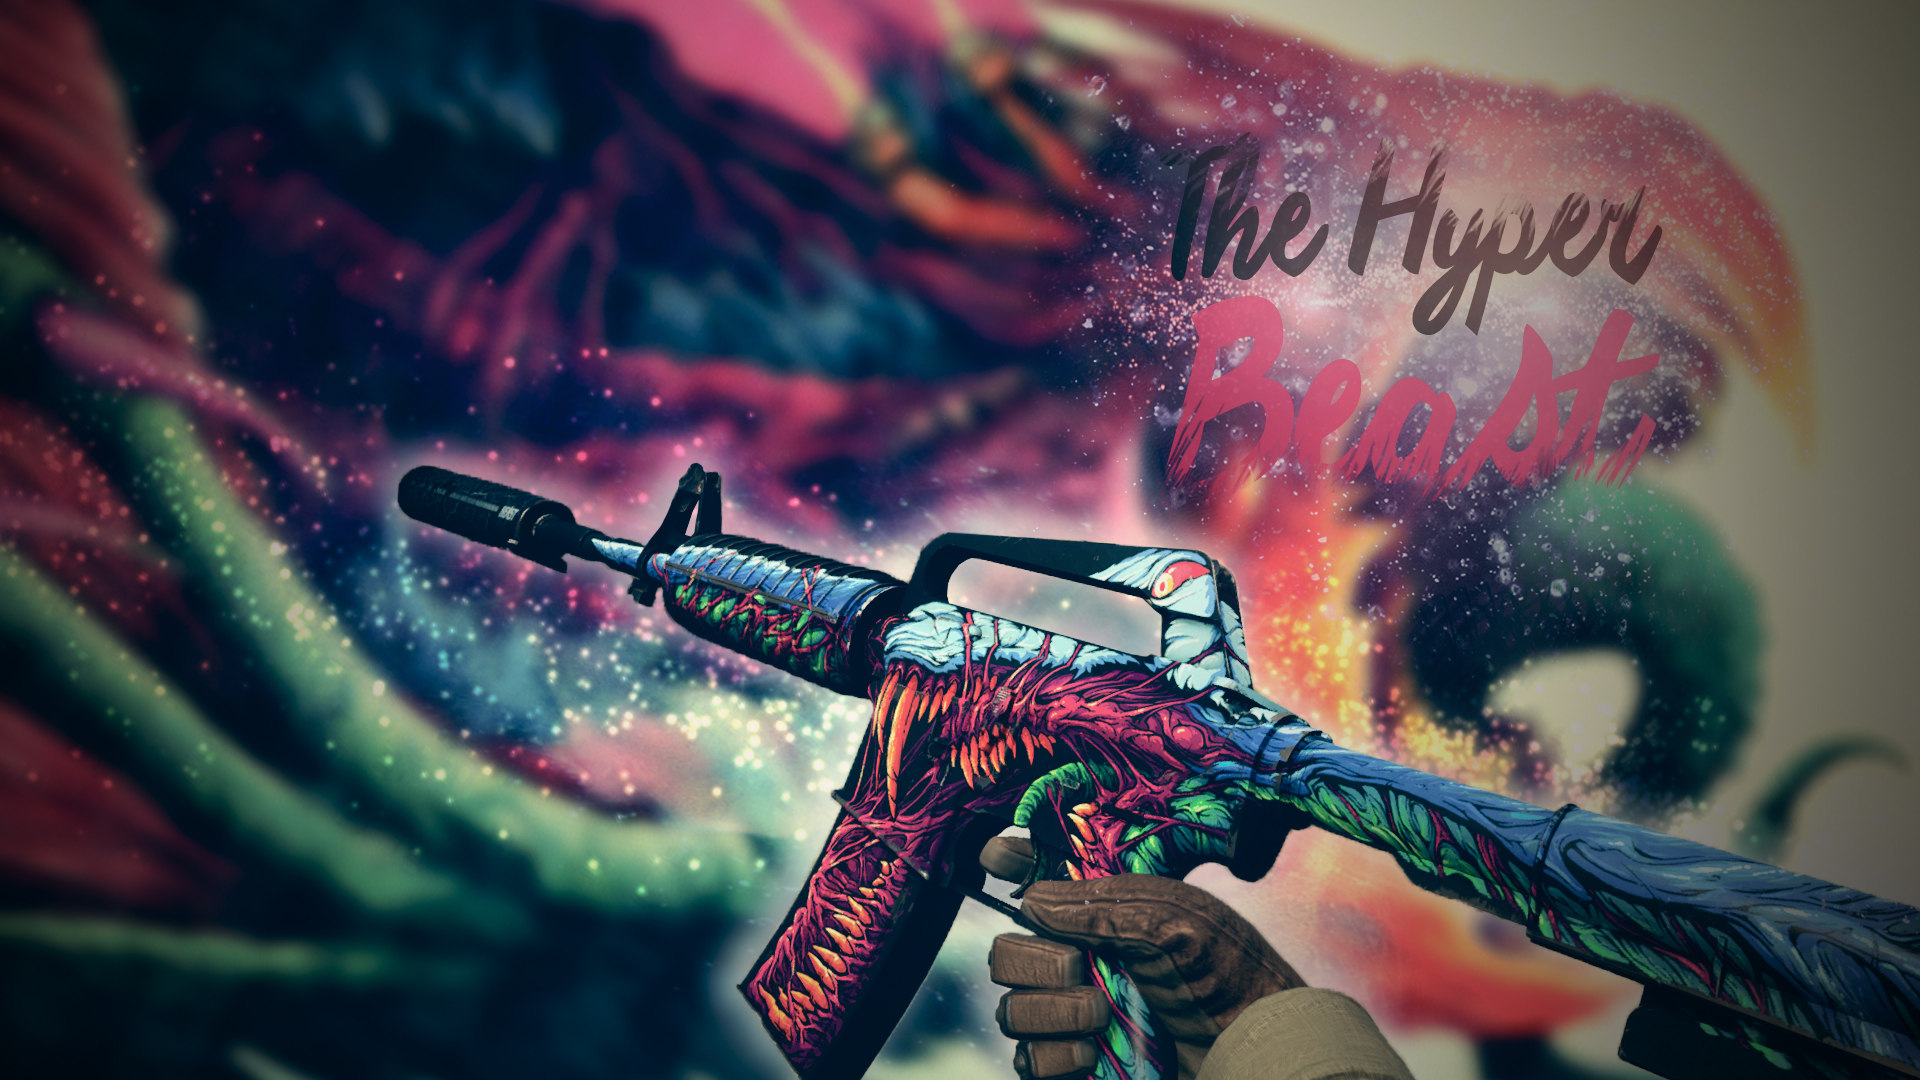 download the new The Beast M249 cs go skin